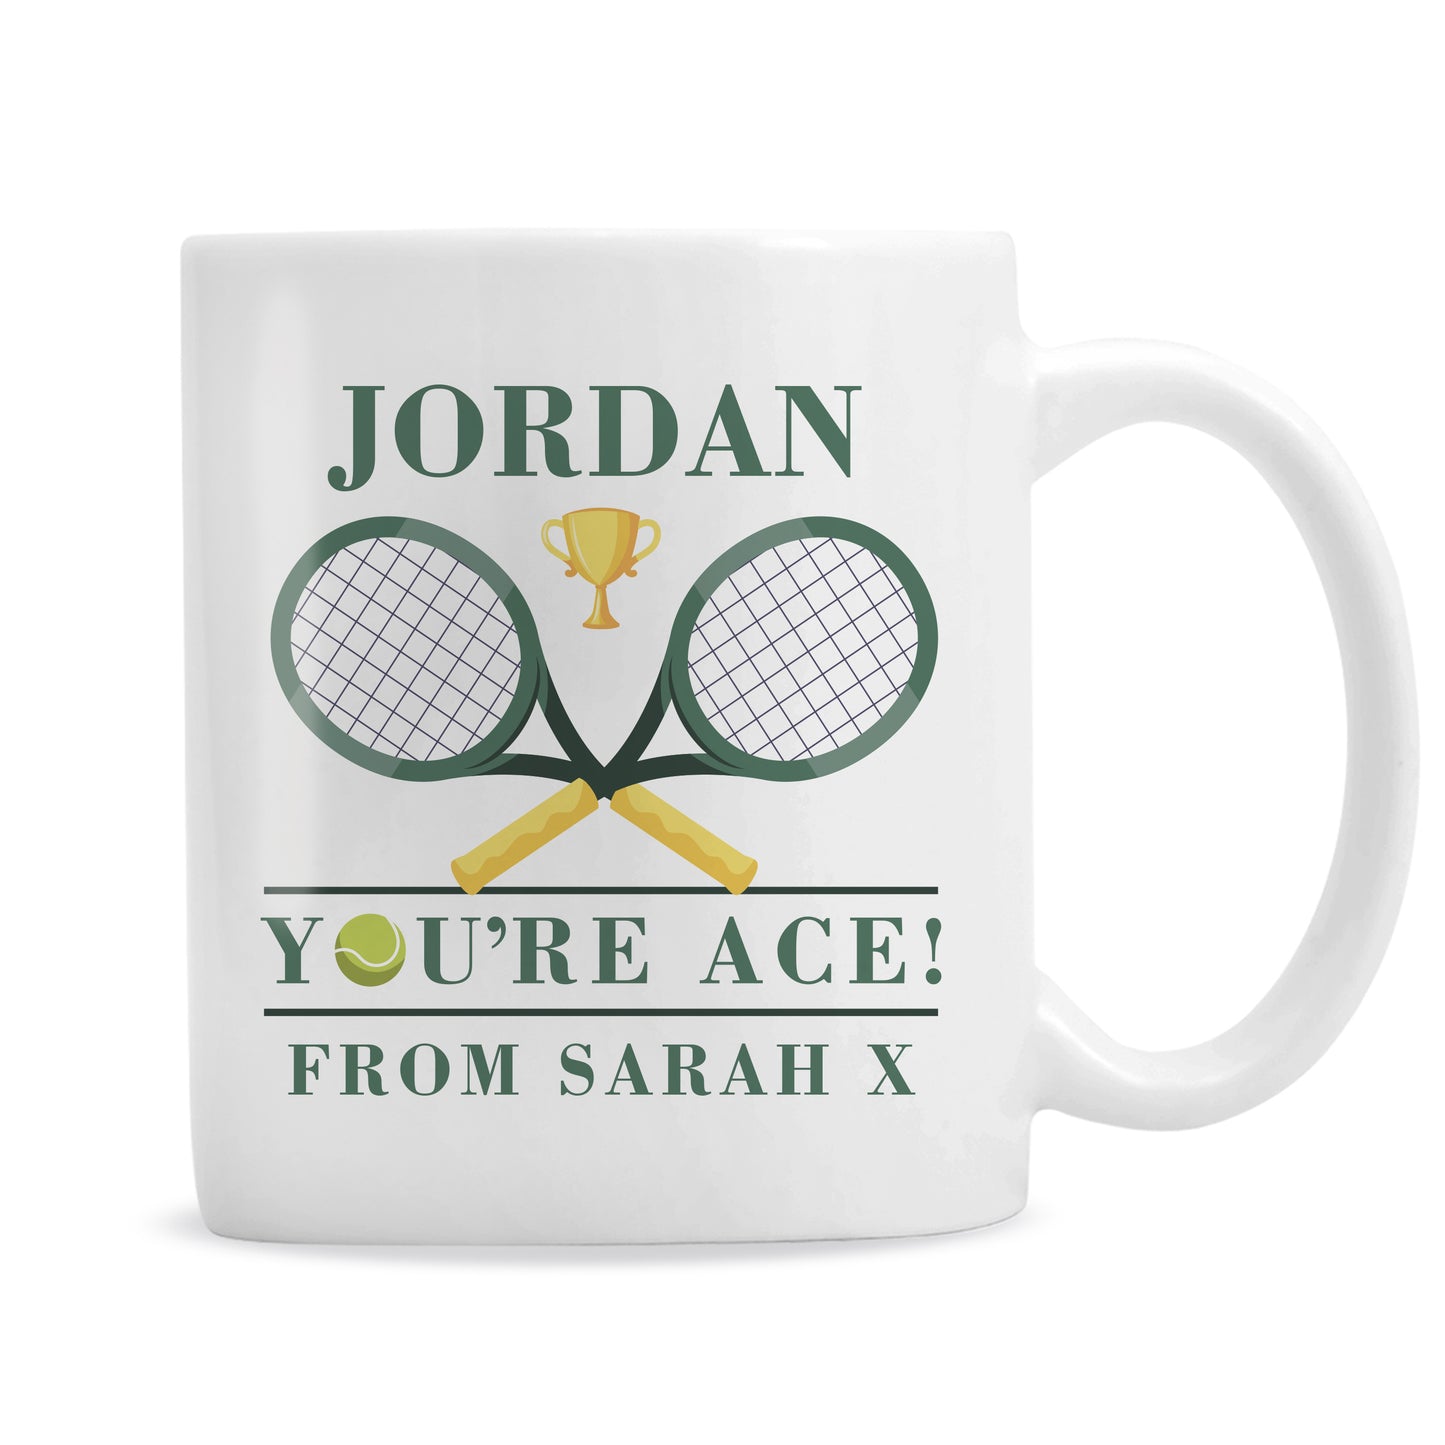 Personalised Tennis Father's Day Mug - Personalise It!